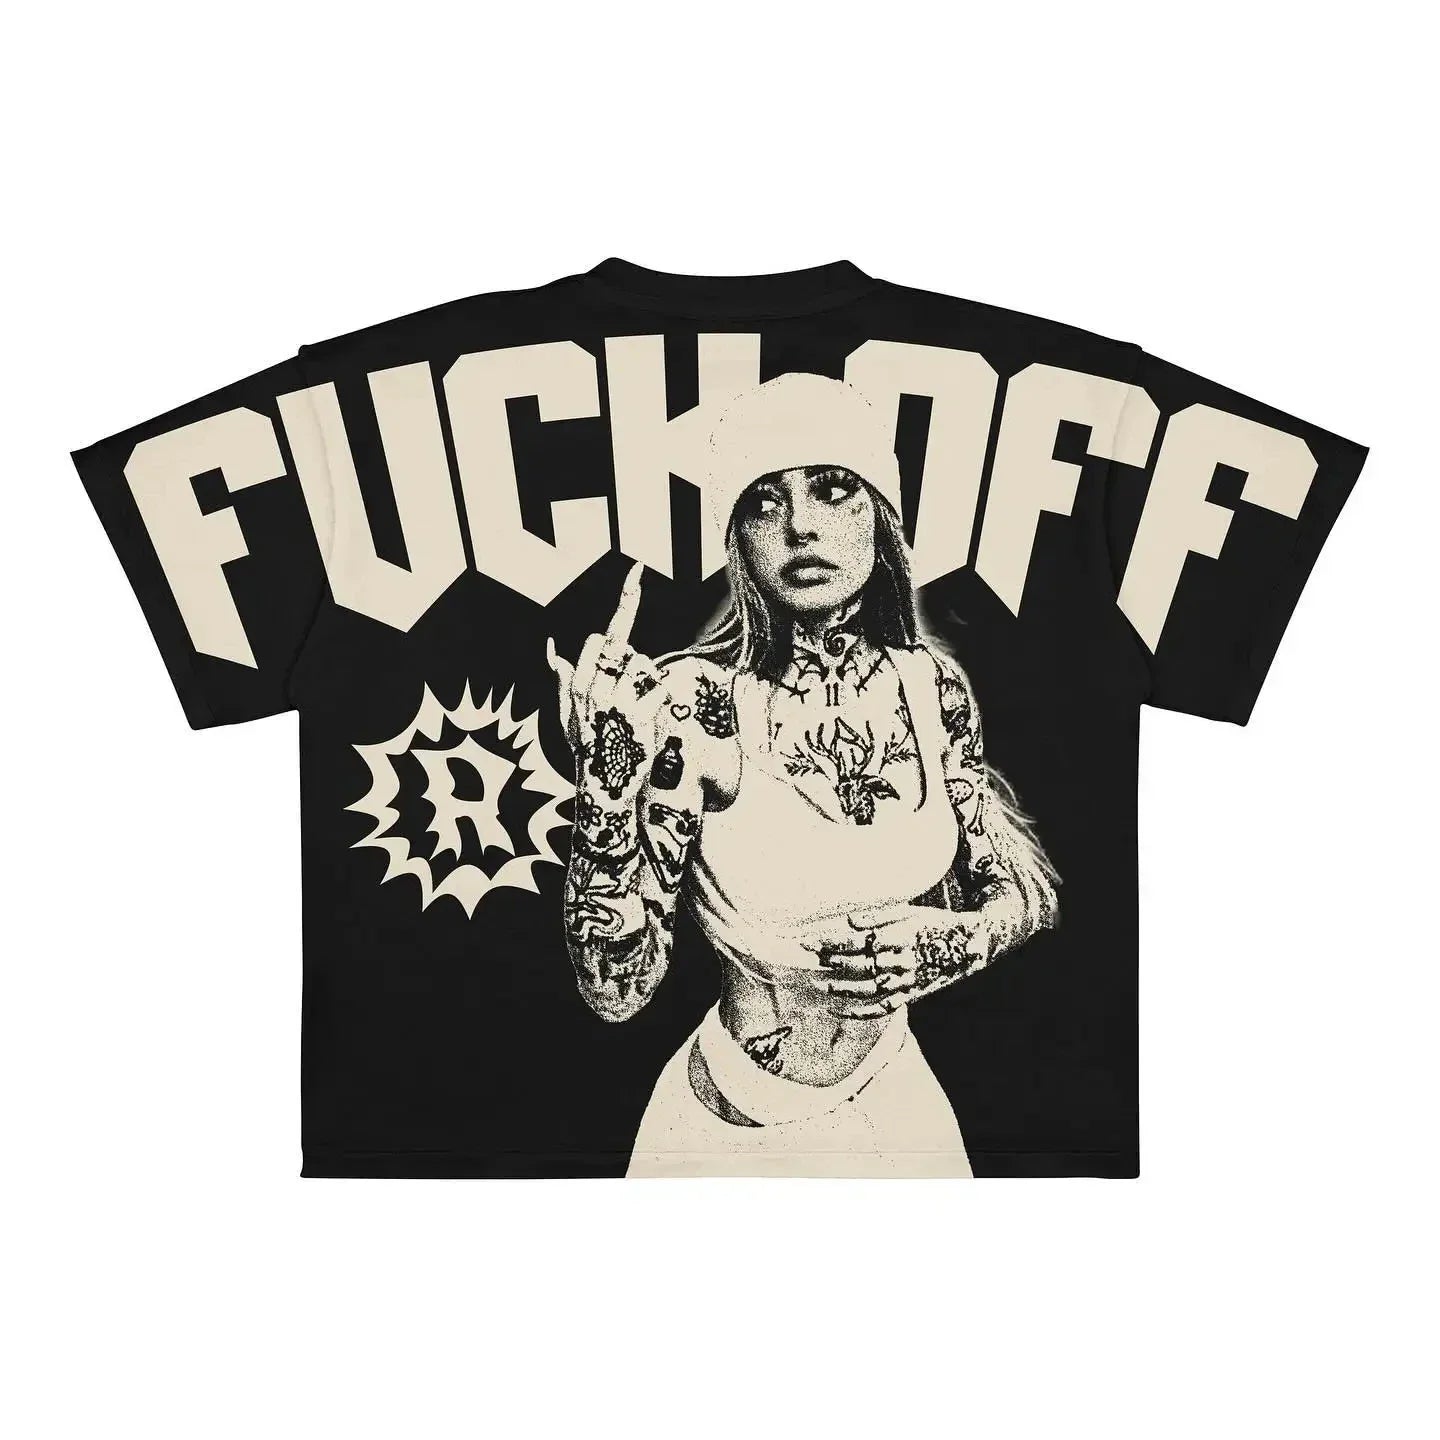 Black t-shirt featuring a tattooed person in a beanie and crop top, making a gesture with their hand. With bold text "FUCK OFF" printed across the back, this piece channels the rebellious spirit of Maramalive™ Punk Hip Hop Graphic T Shirts Mens Vintage Y2k Top Goth Oversized T Shirt Fashion Loose Casual Short Sleeve Streetwear.